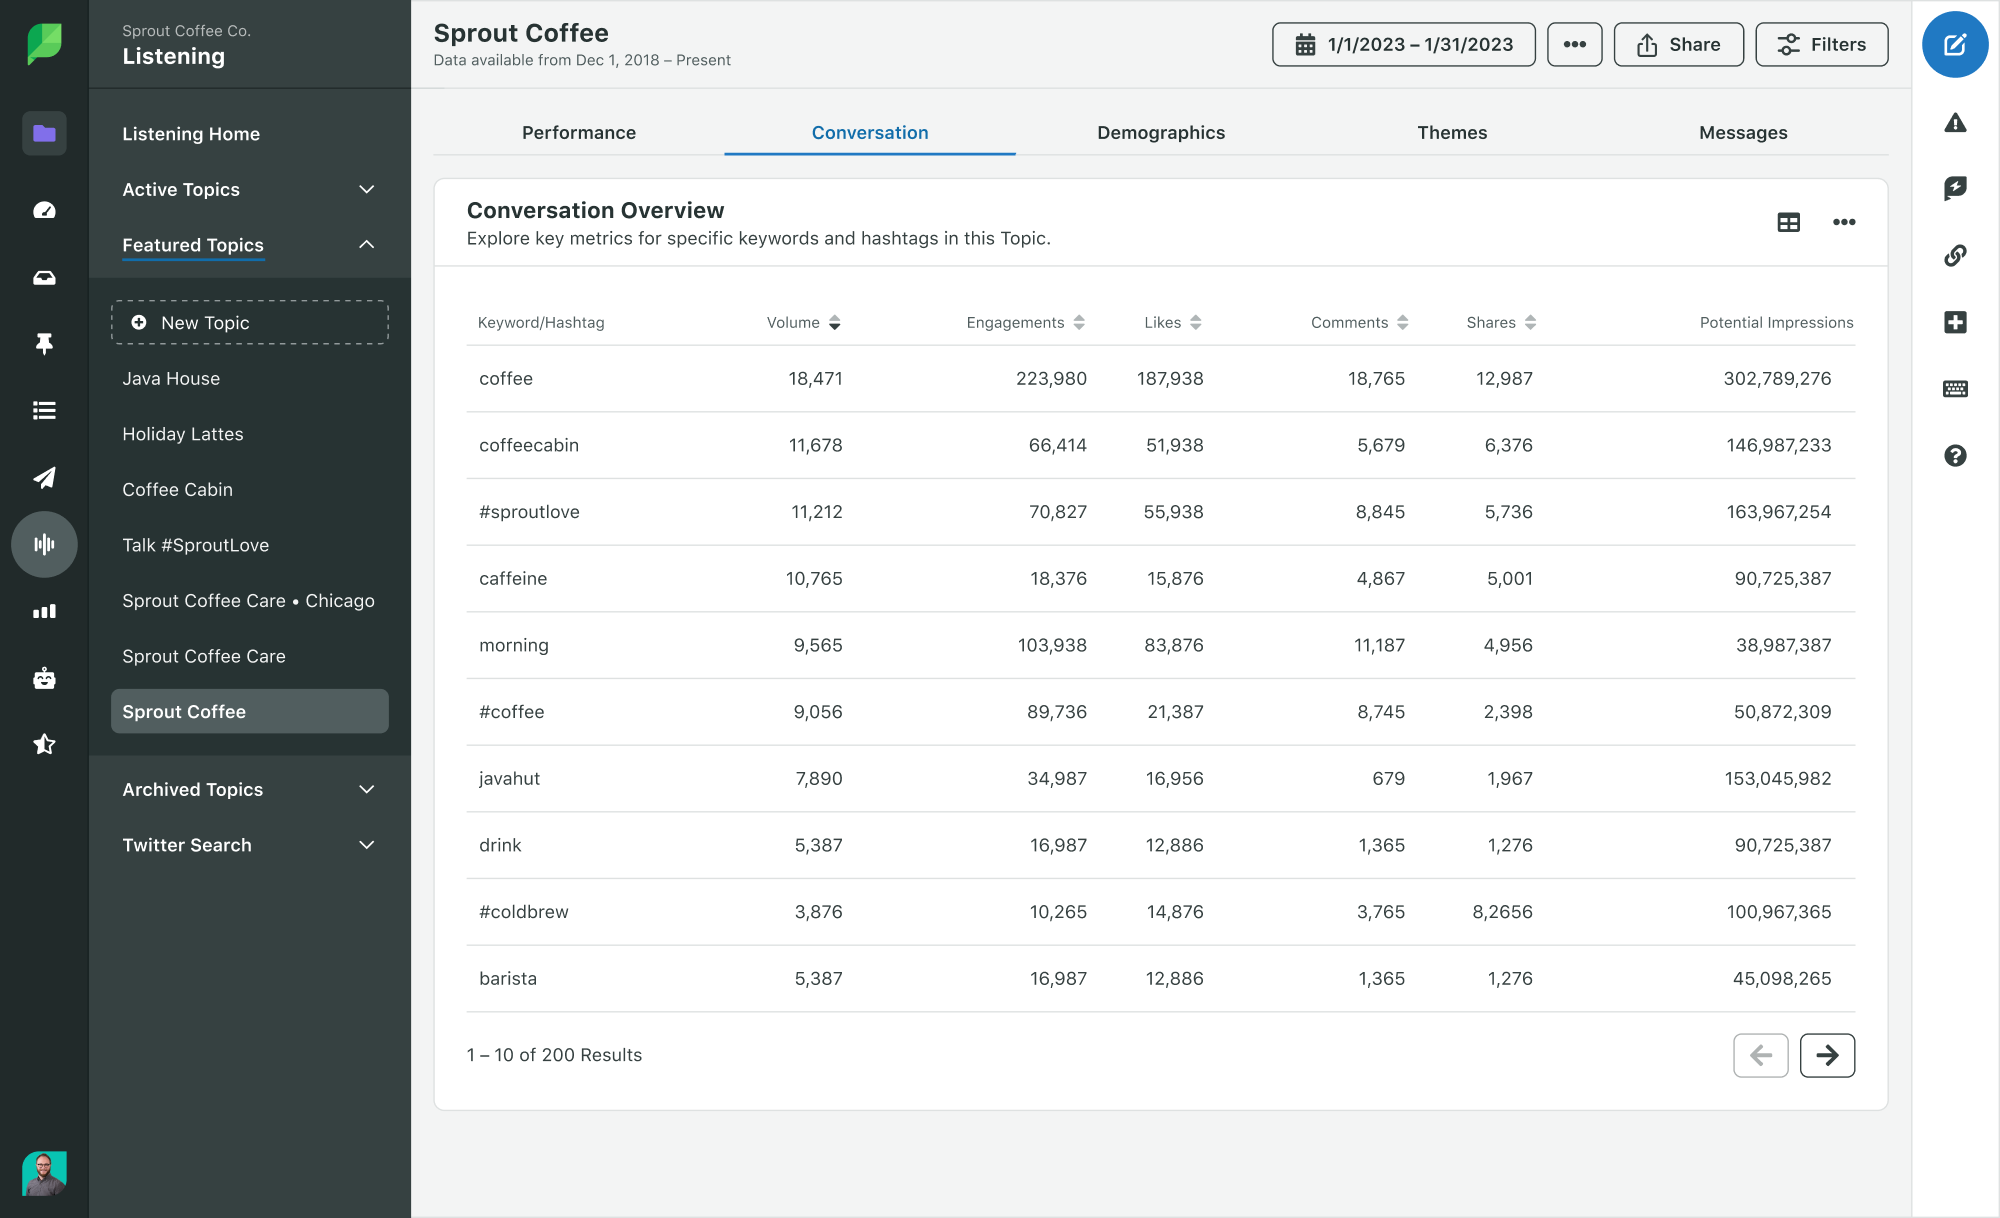 A screenshot of Sprout Social's listening tool showing data on various metrics such as customer conversations, themes, engagements, keywords and more.